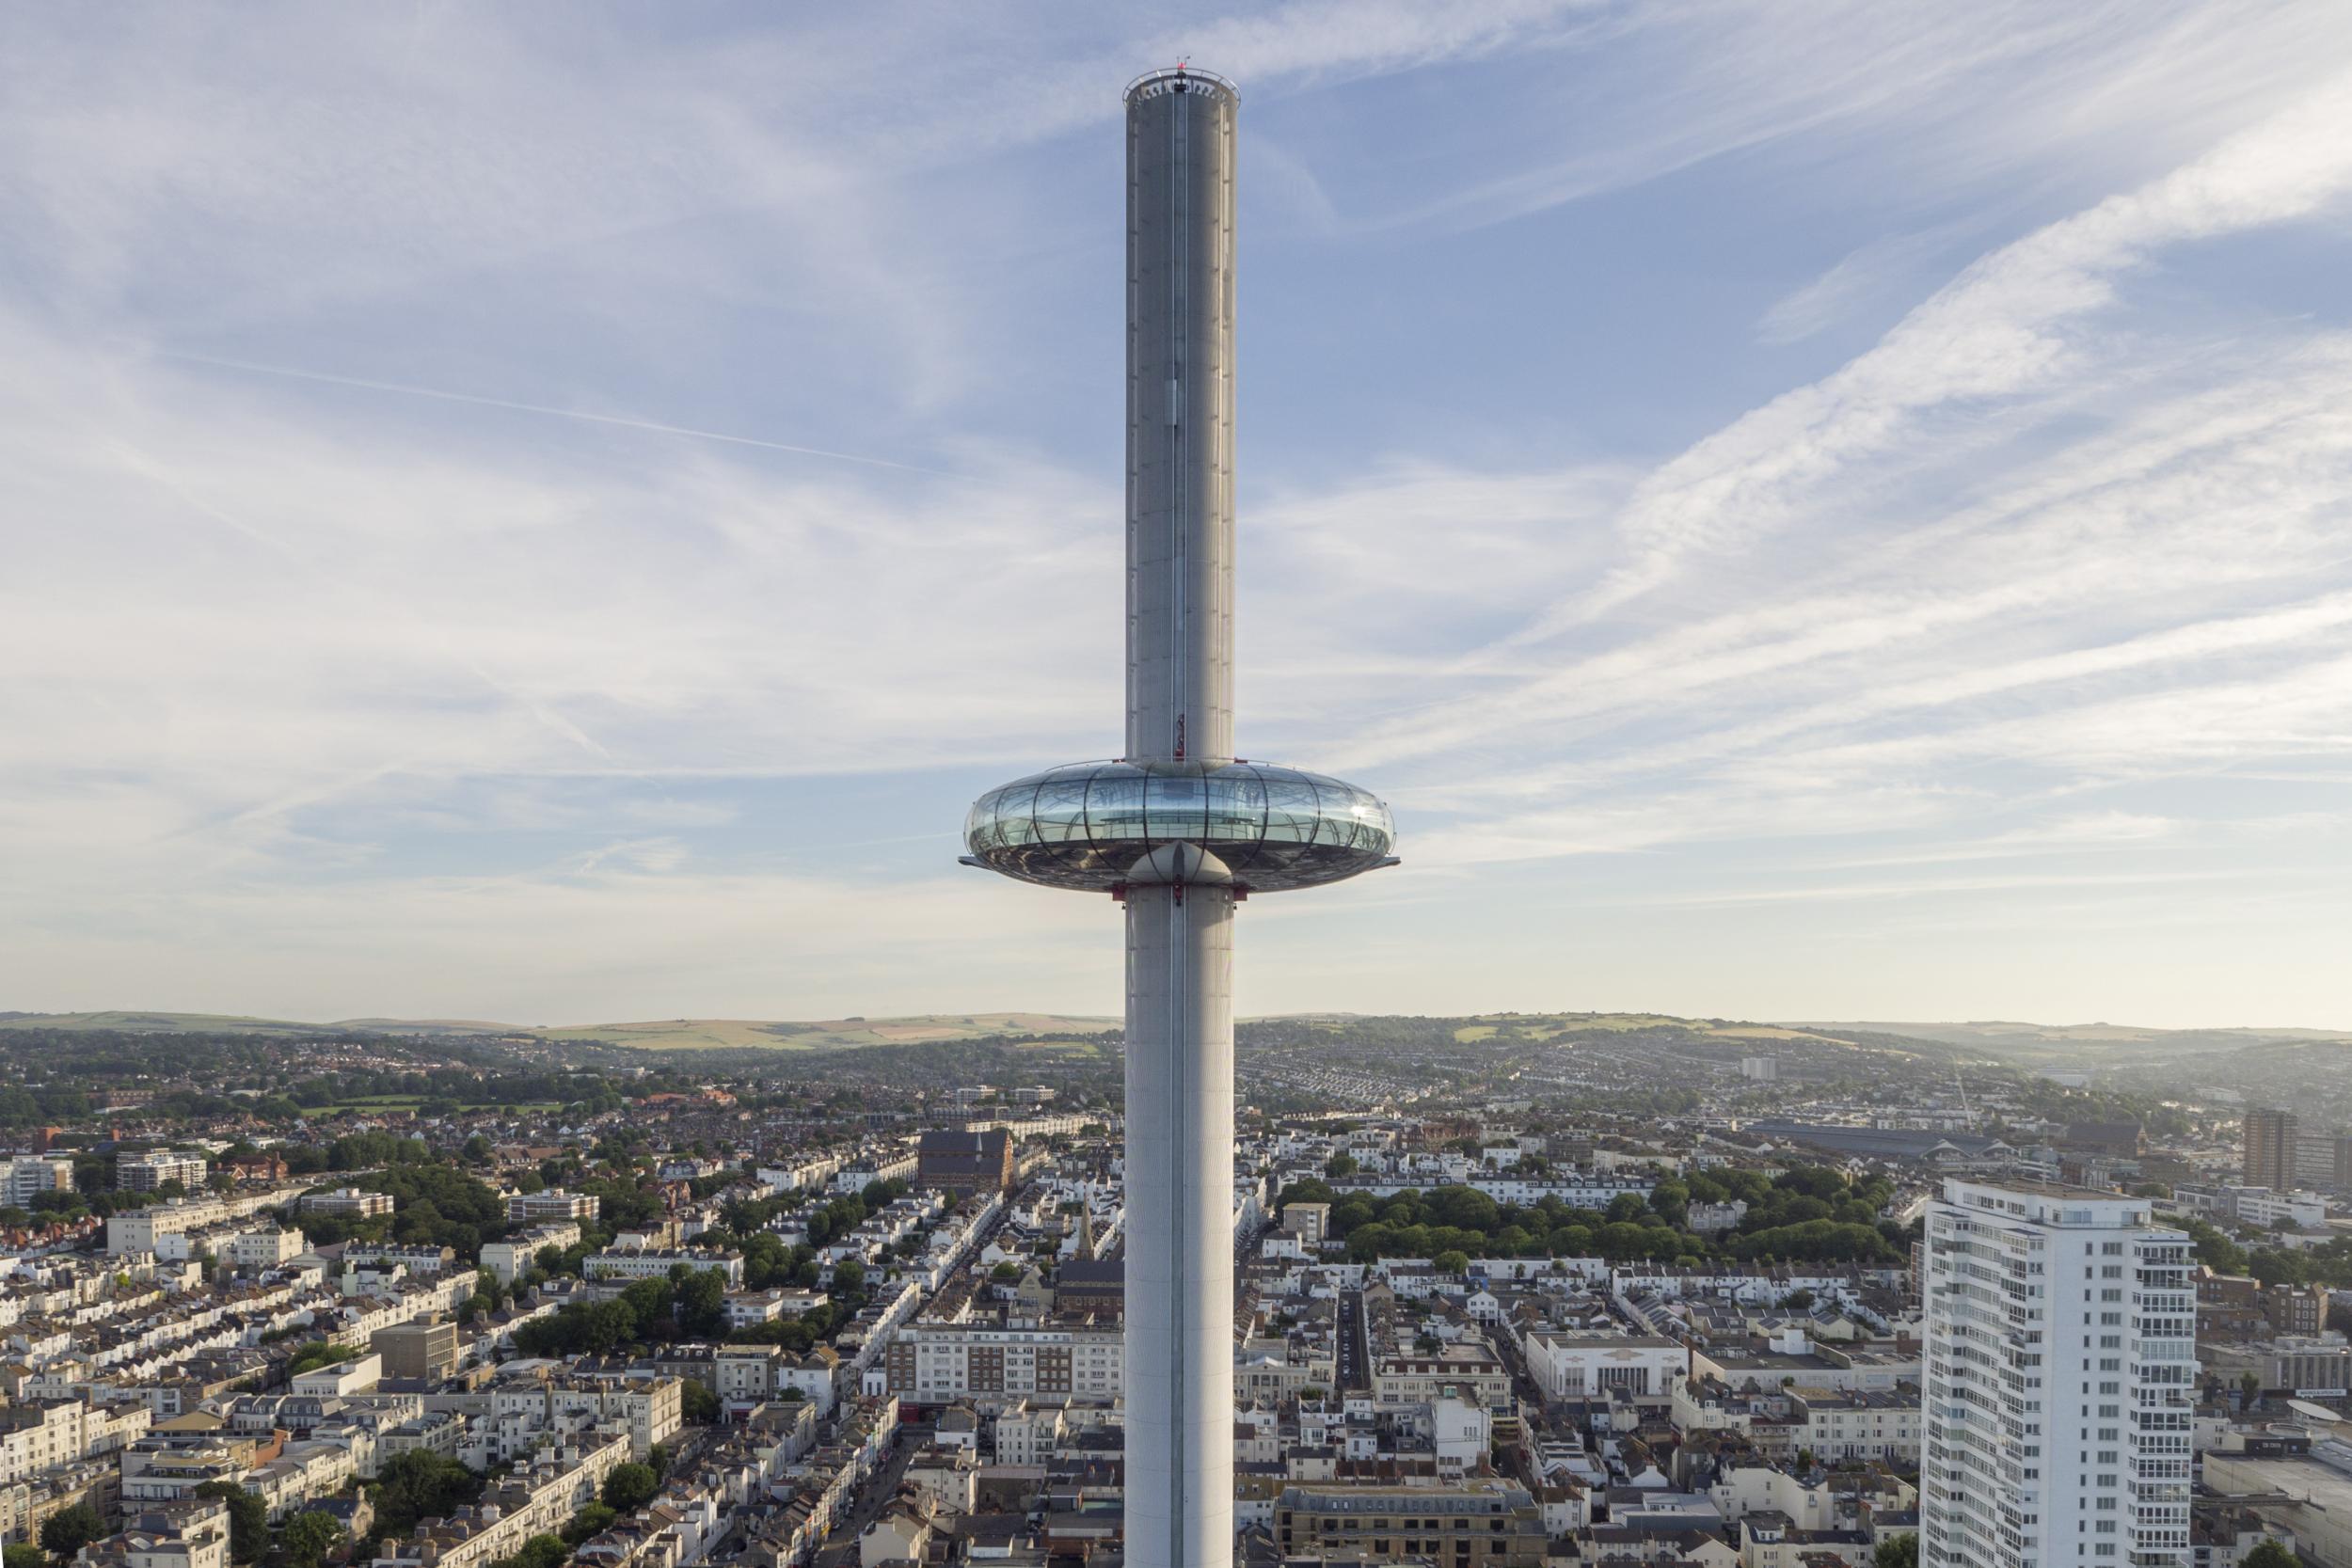 Passengers can walk around the circumference of the i360's glass doughnut in the sky